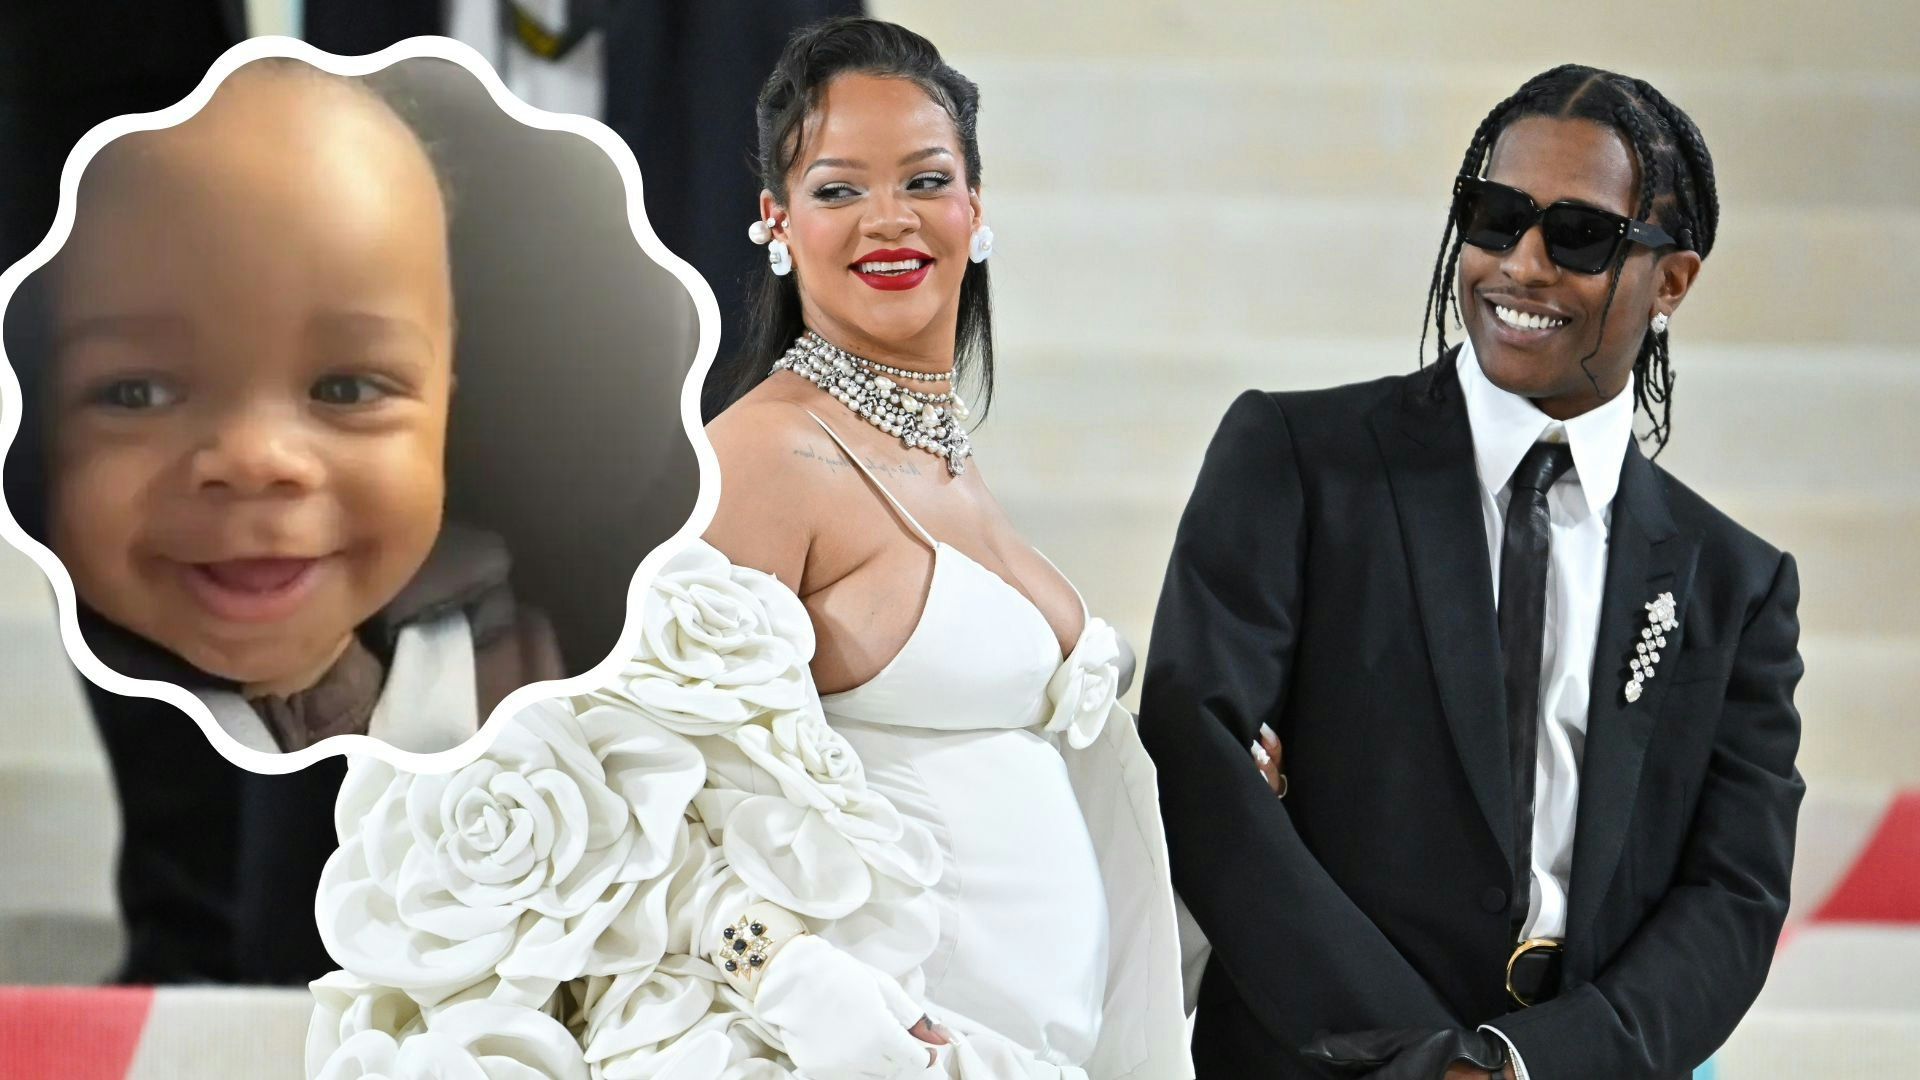 ASAP Rocky and Rihanna's big fits are preparing us for something